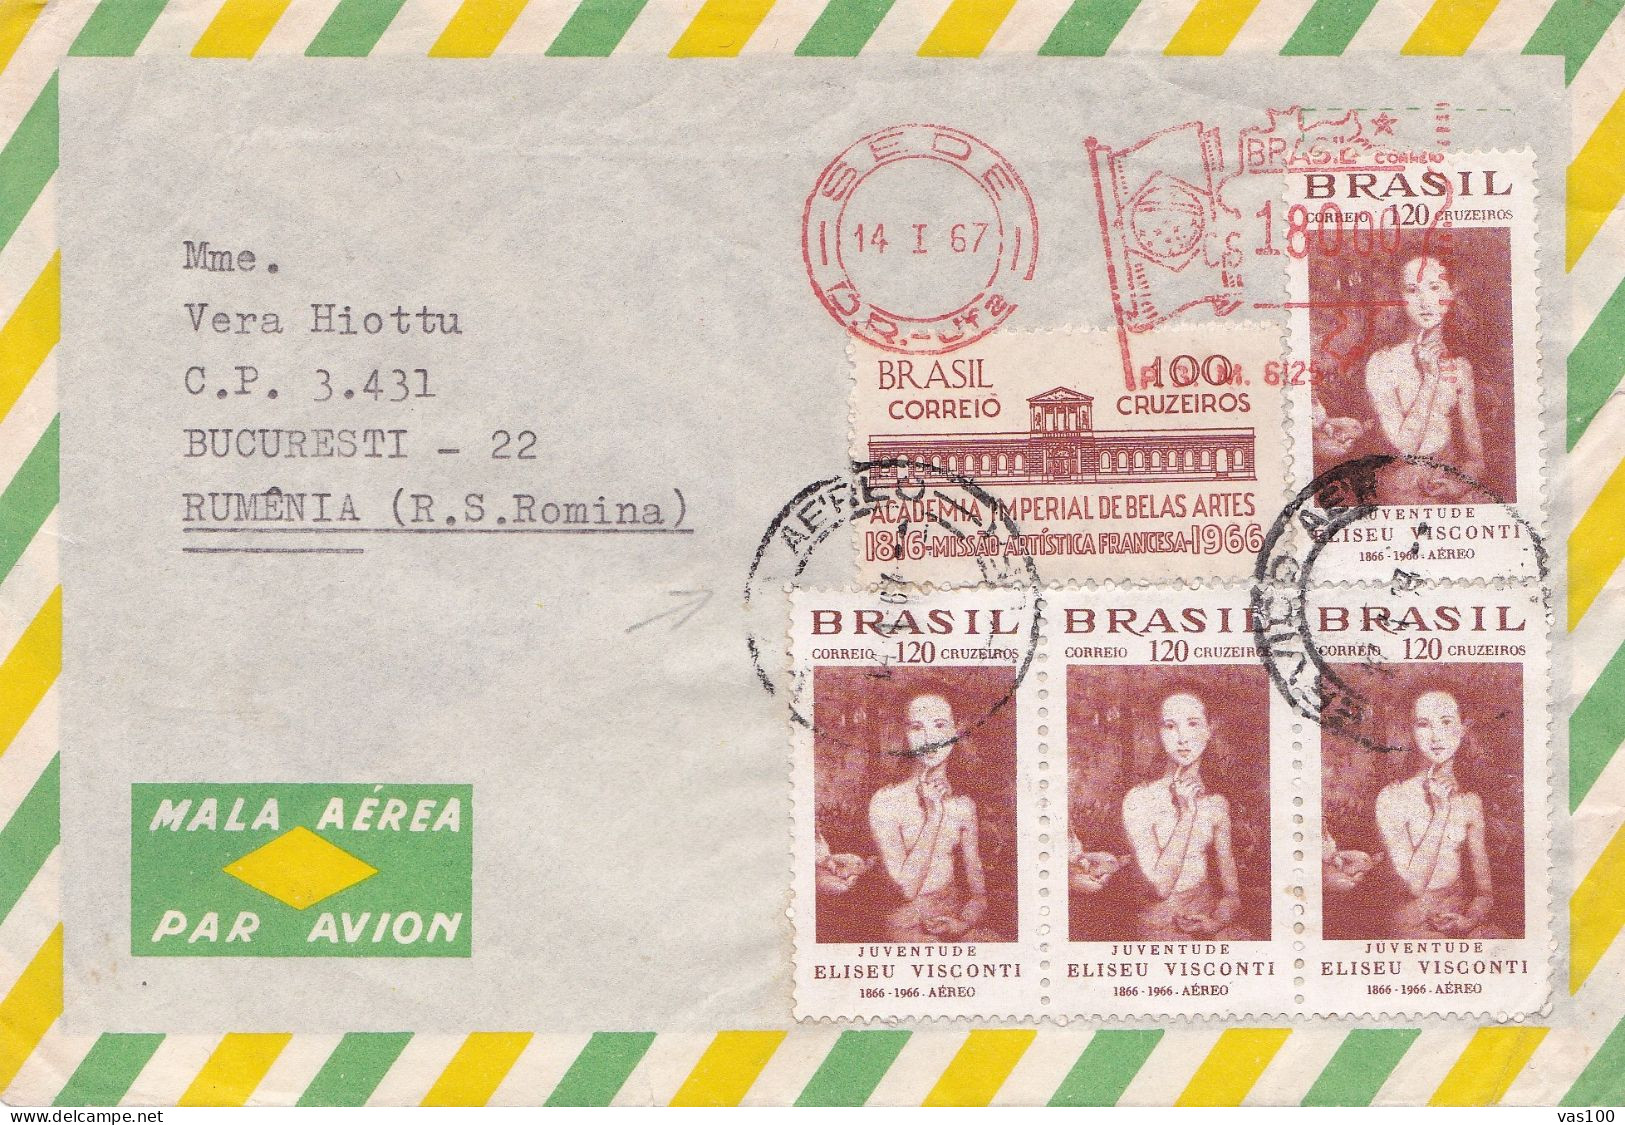 SPECIAL PMK, POSTAL AEREO COVERS 1967,BRAZIL - Covers & Documents